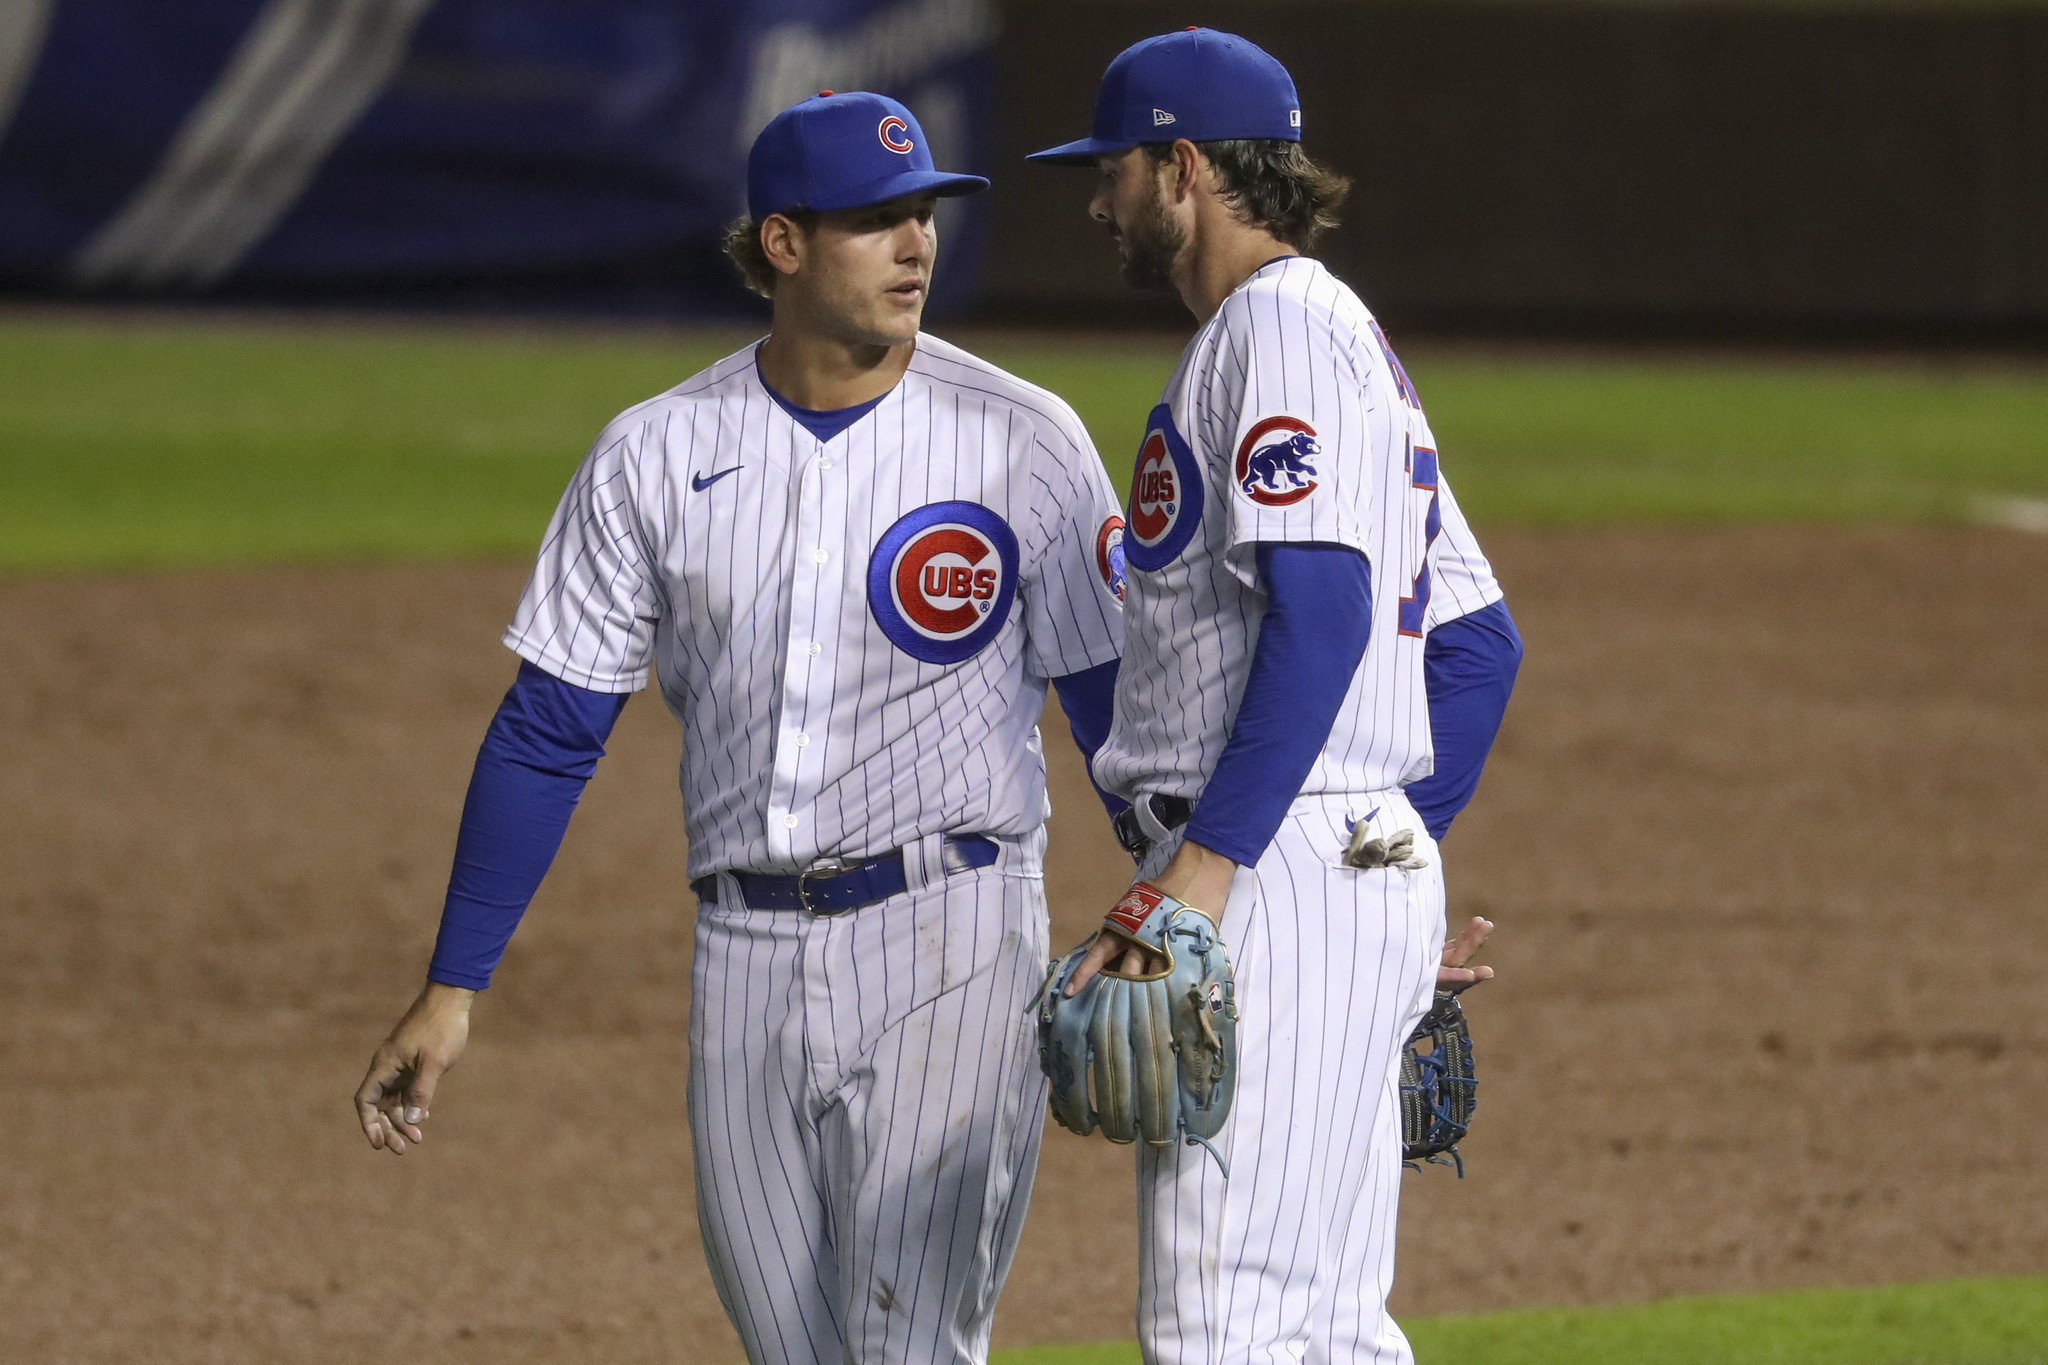 Photo: Chicago Cubs' David Bote, Kris Bryant, Anthony Rizzo and